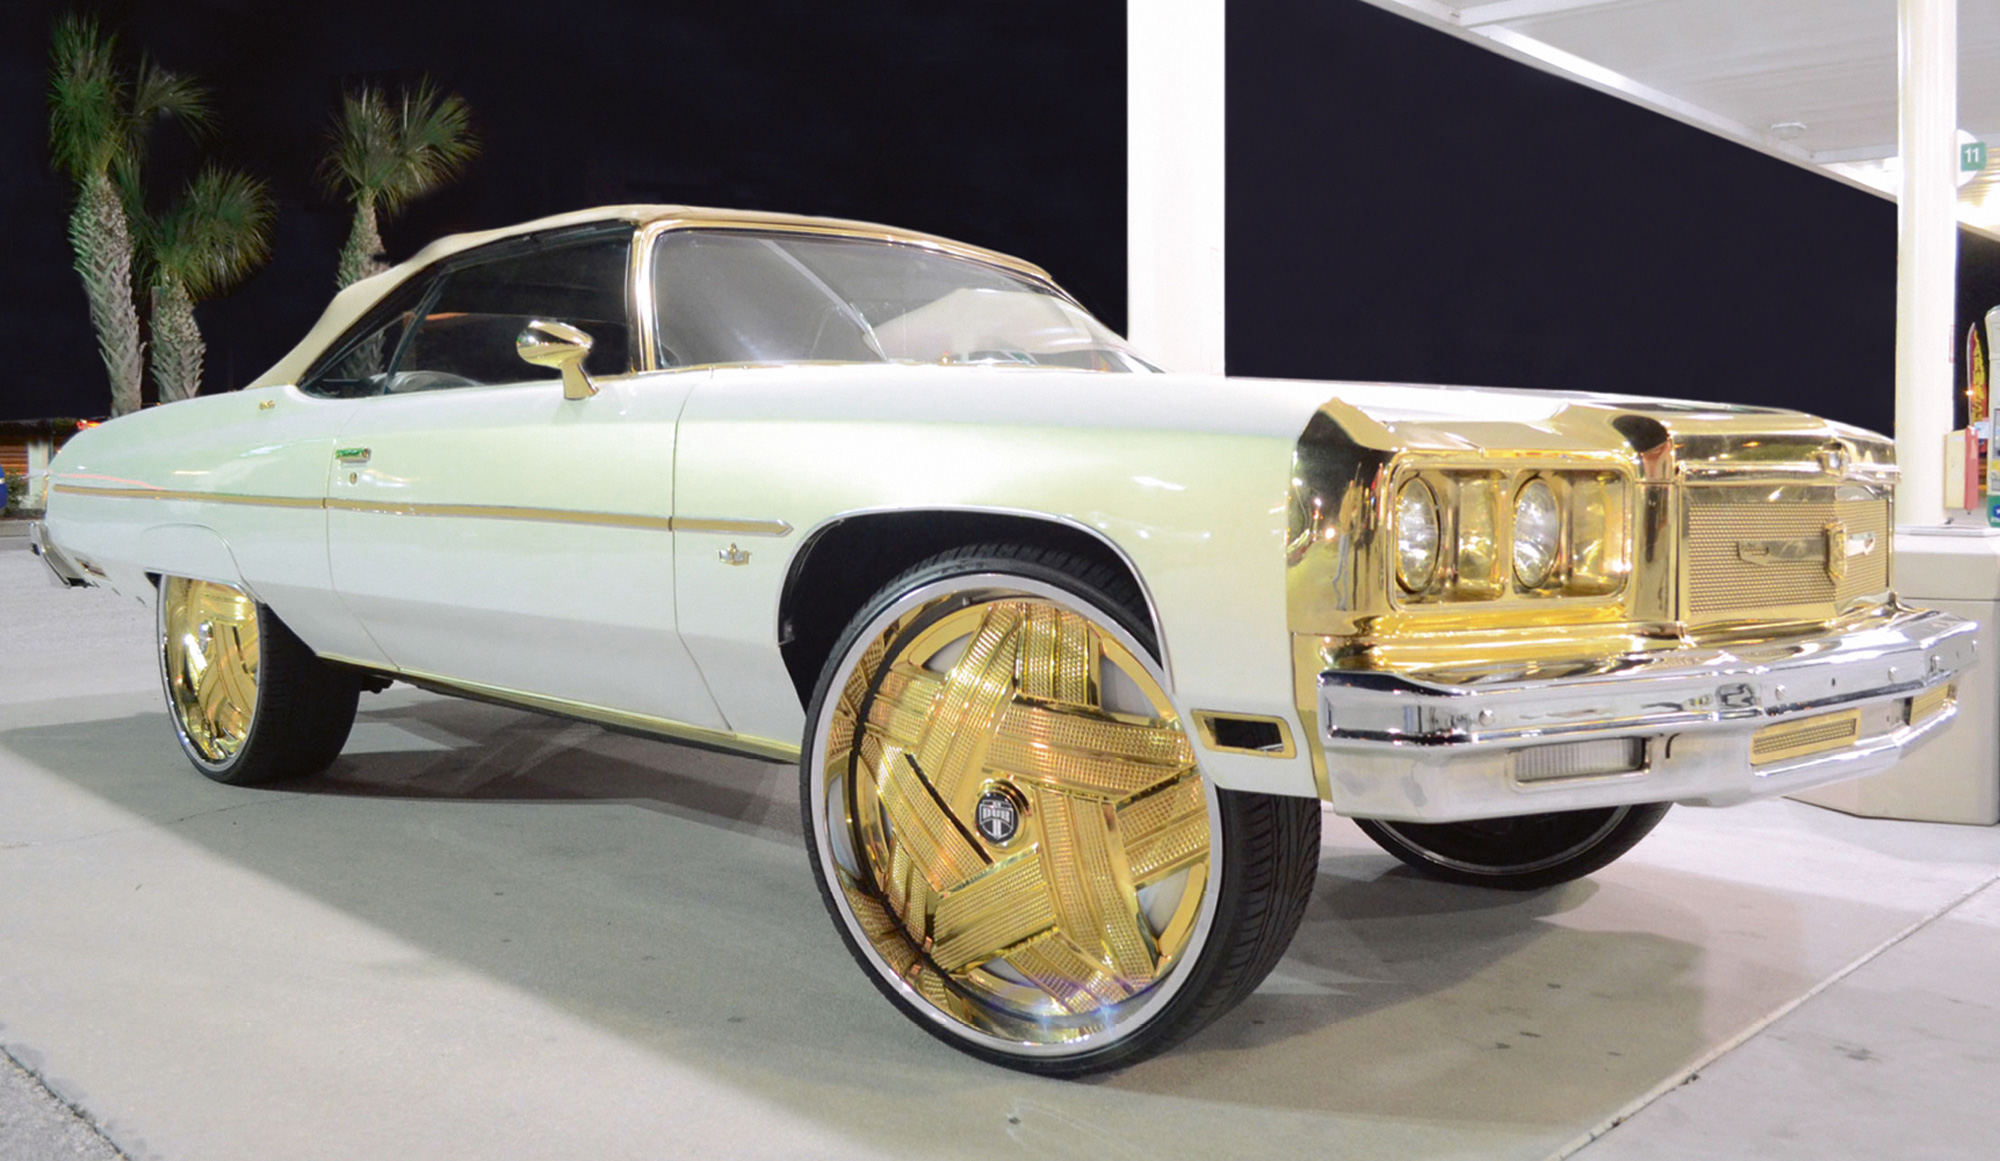 A photograph of an expensive car with ornate gold-rimmed wheels.